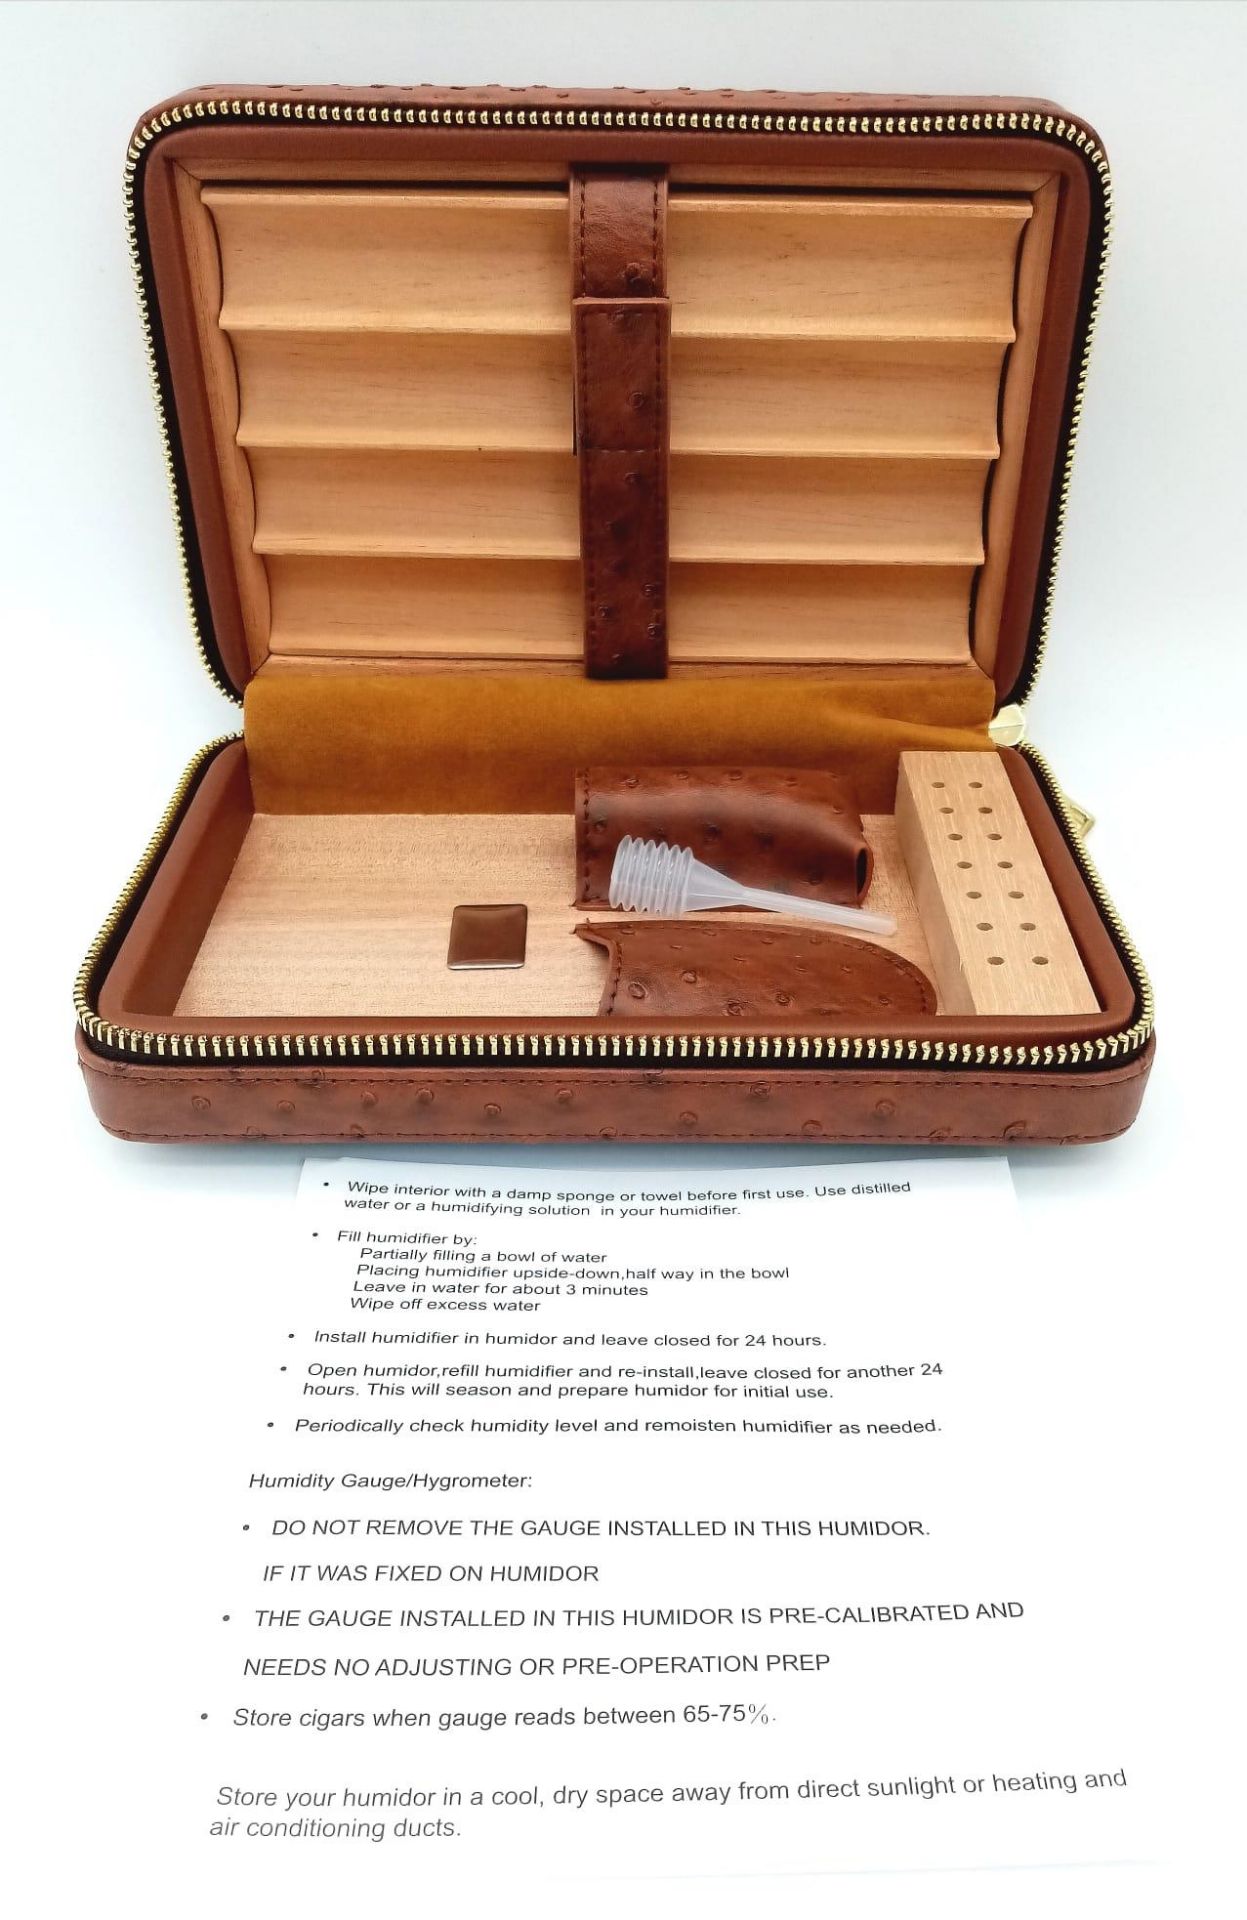 A COHIBA traveling cigar humidor oozing quality and class. Exterior ostrich leather covering the